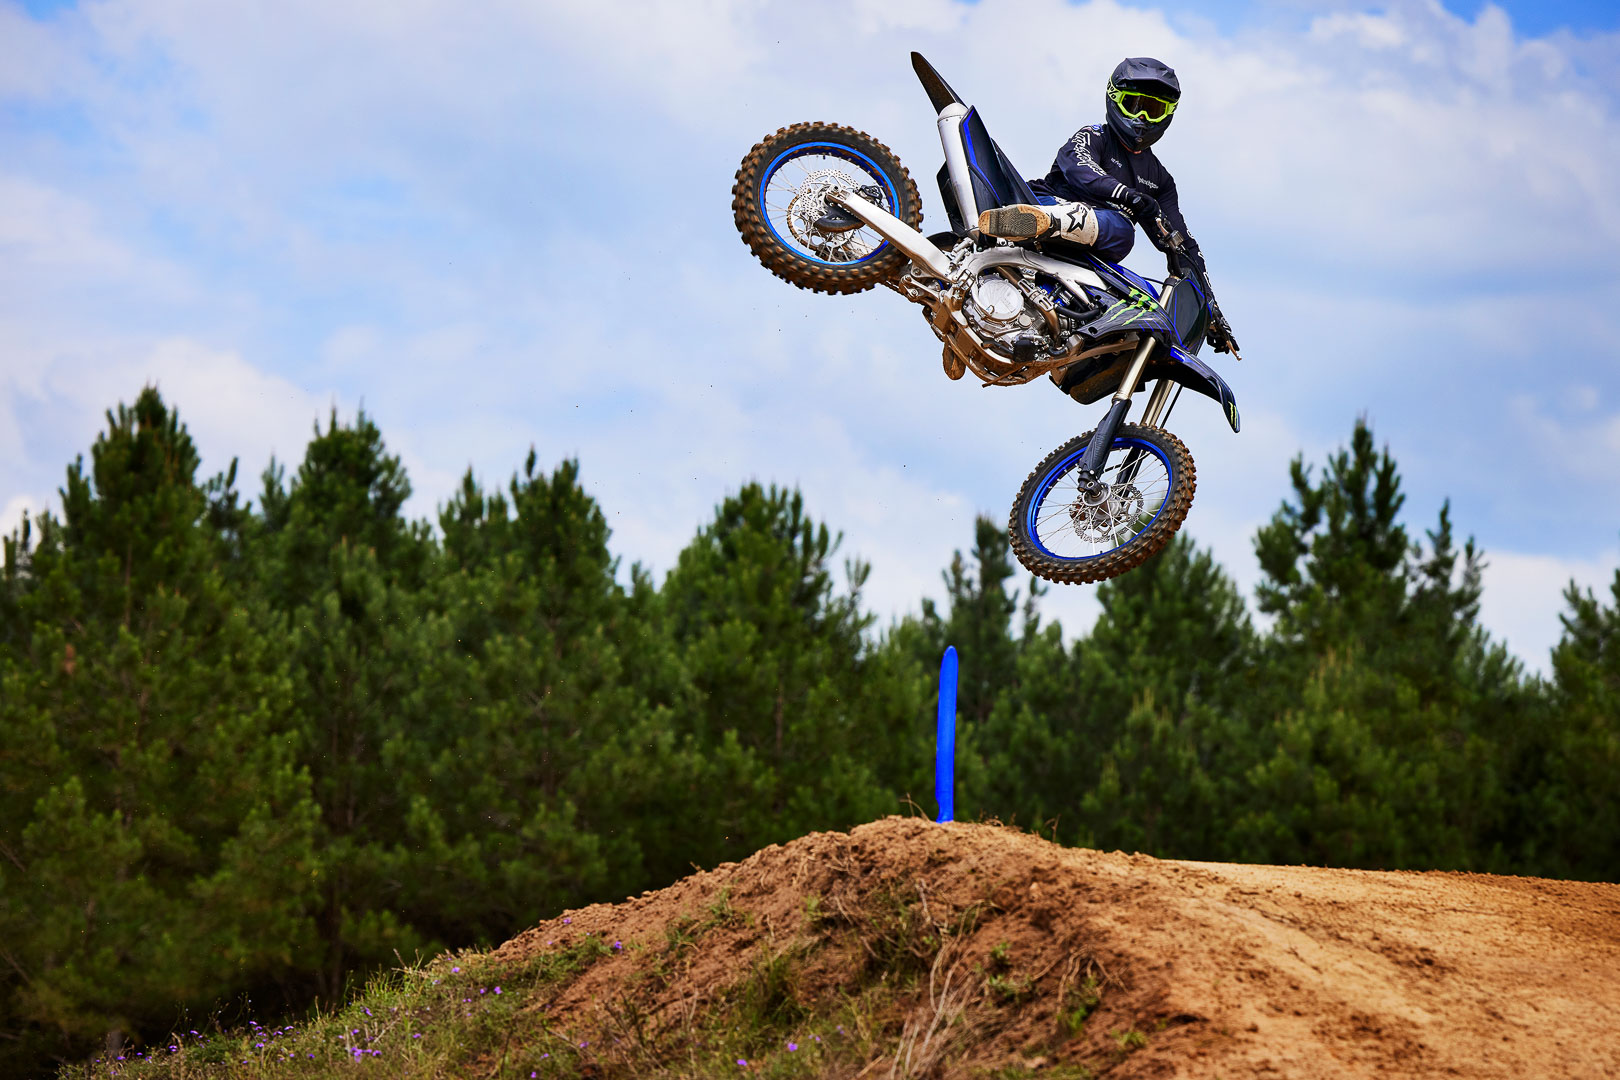  Yamaha YZ450F First Look Fast Facts Photos